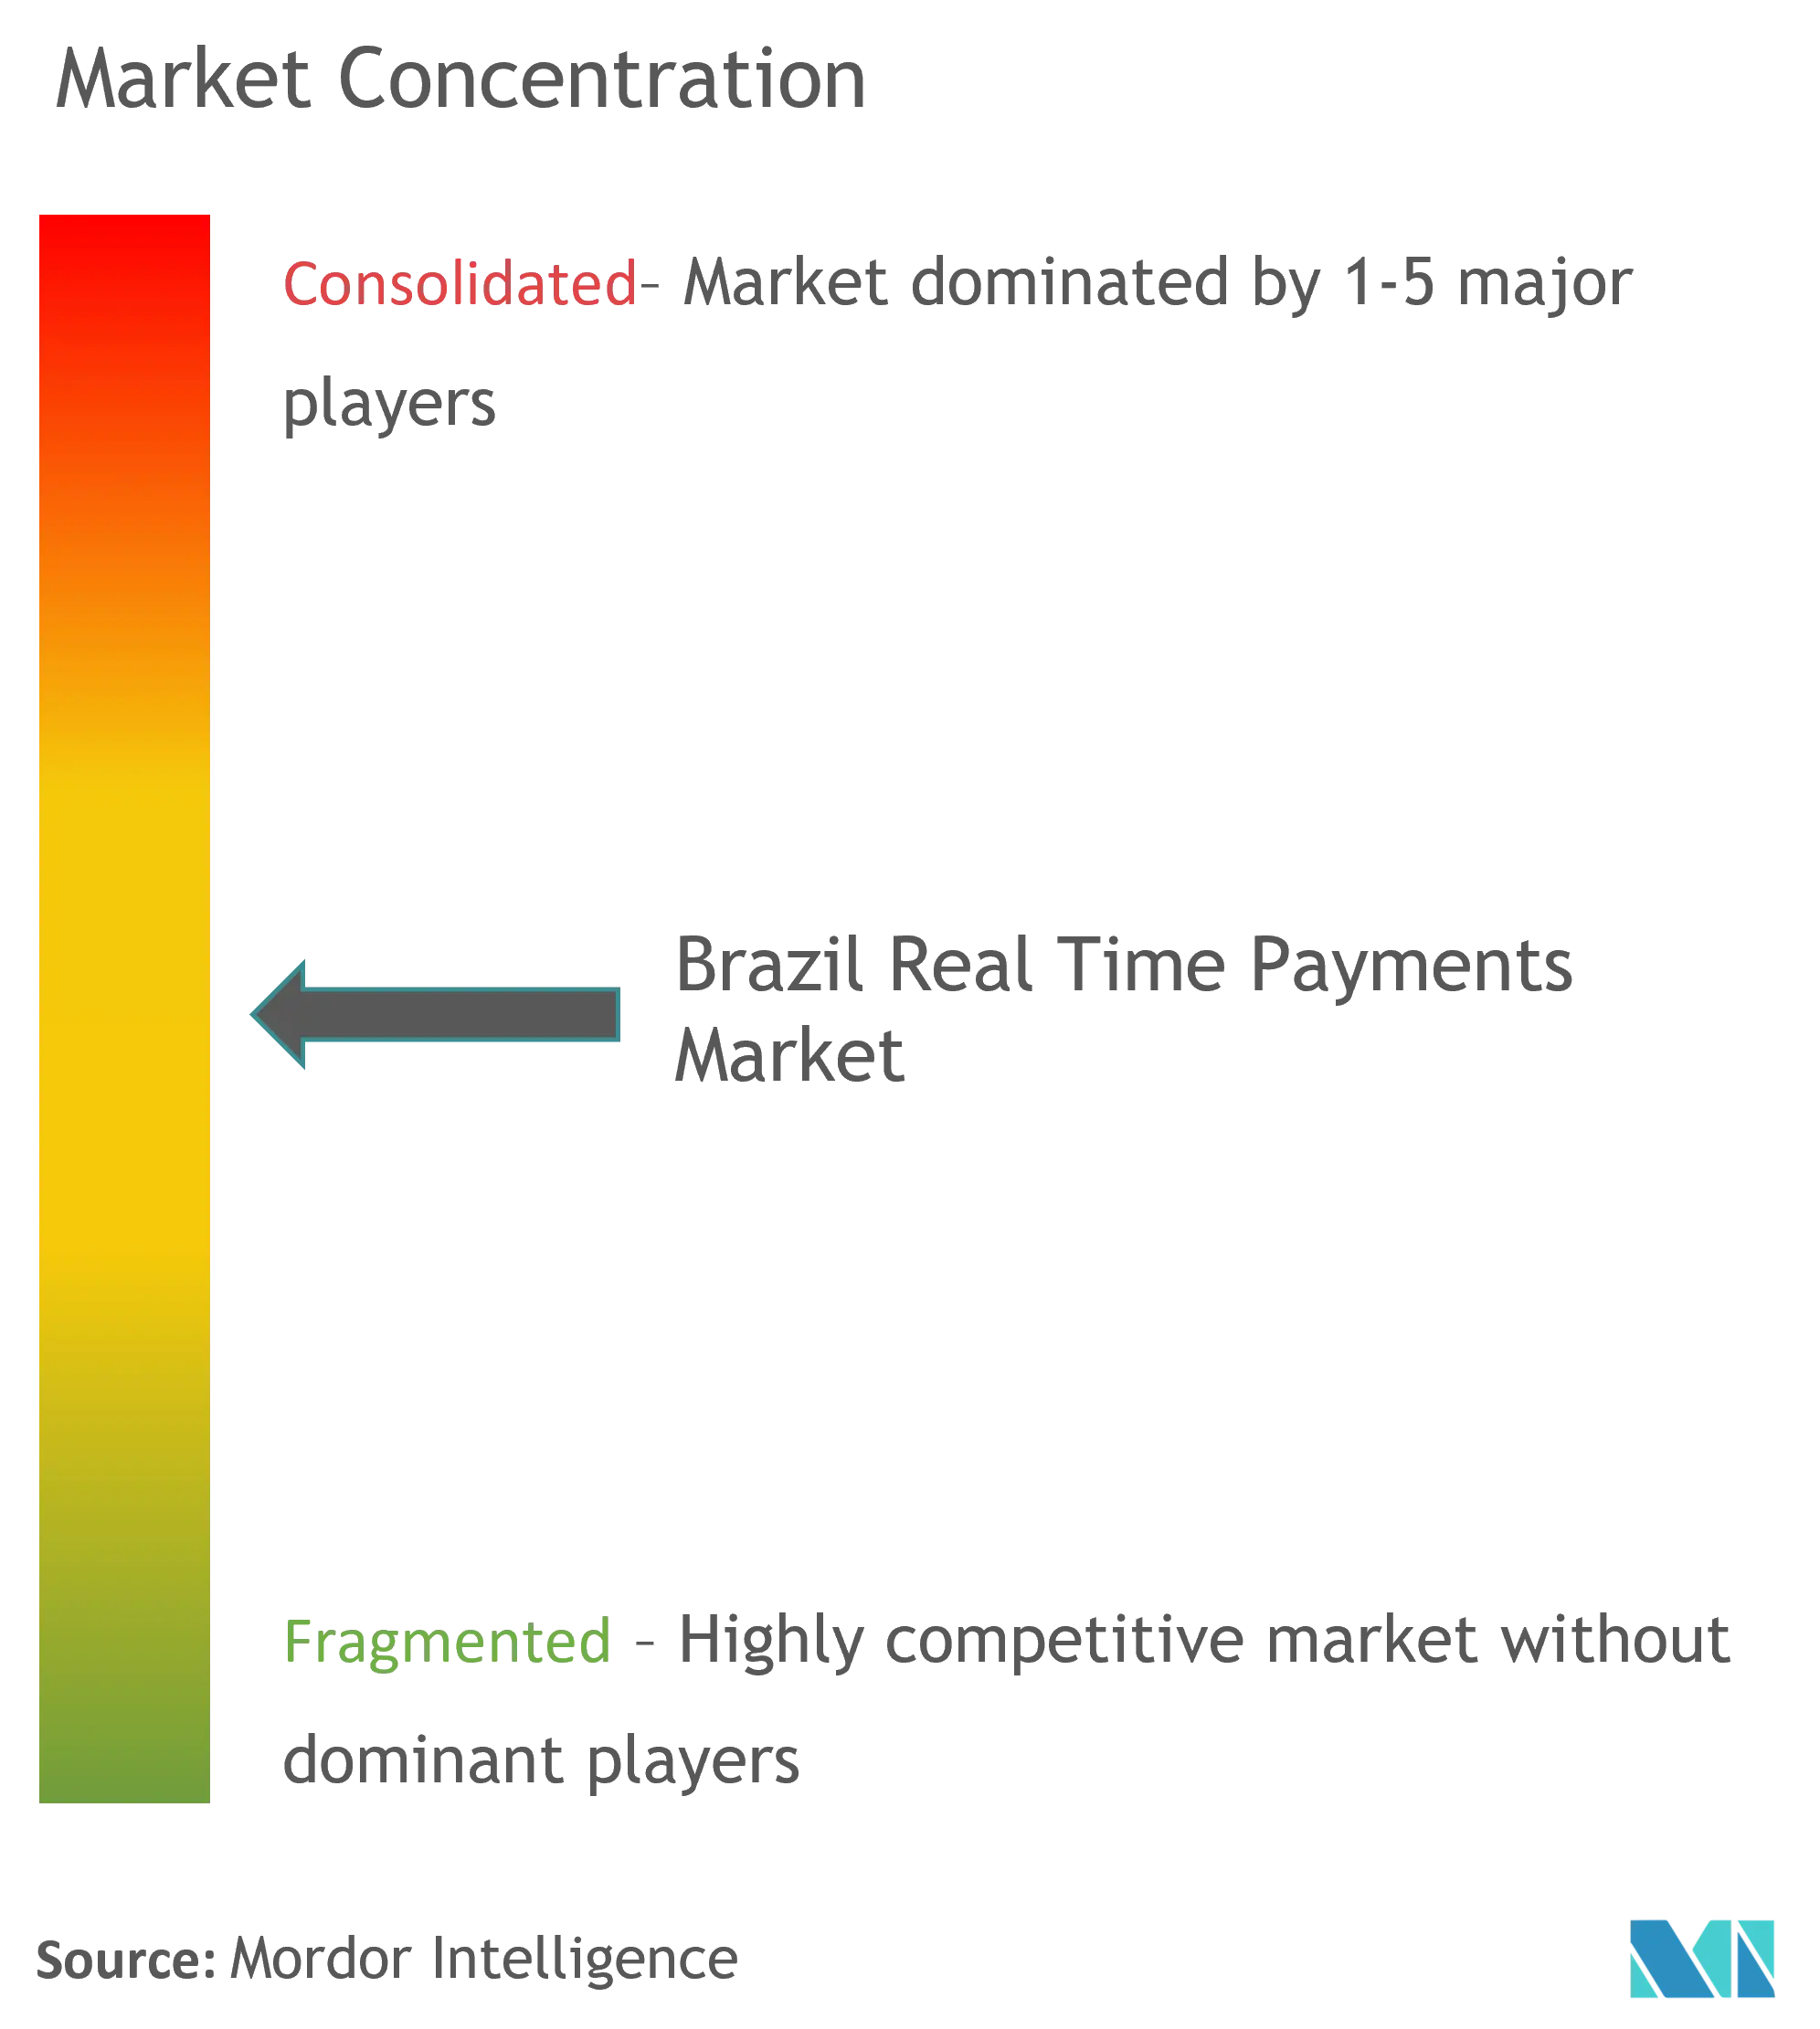 Brazil Real Time Payments Market - Market Concentration.png